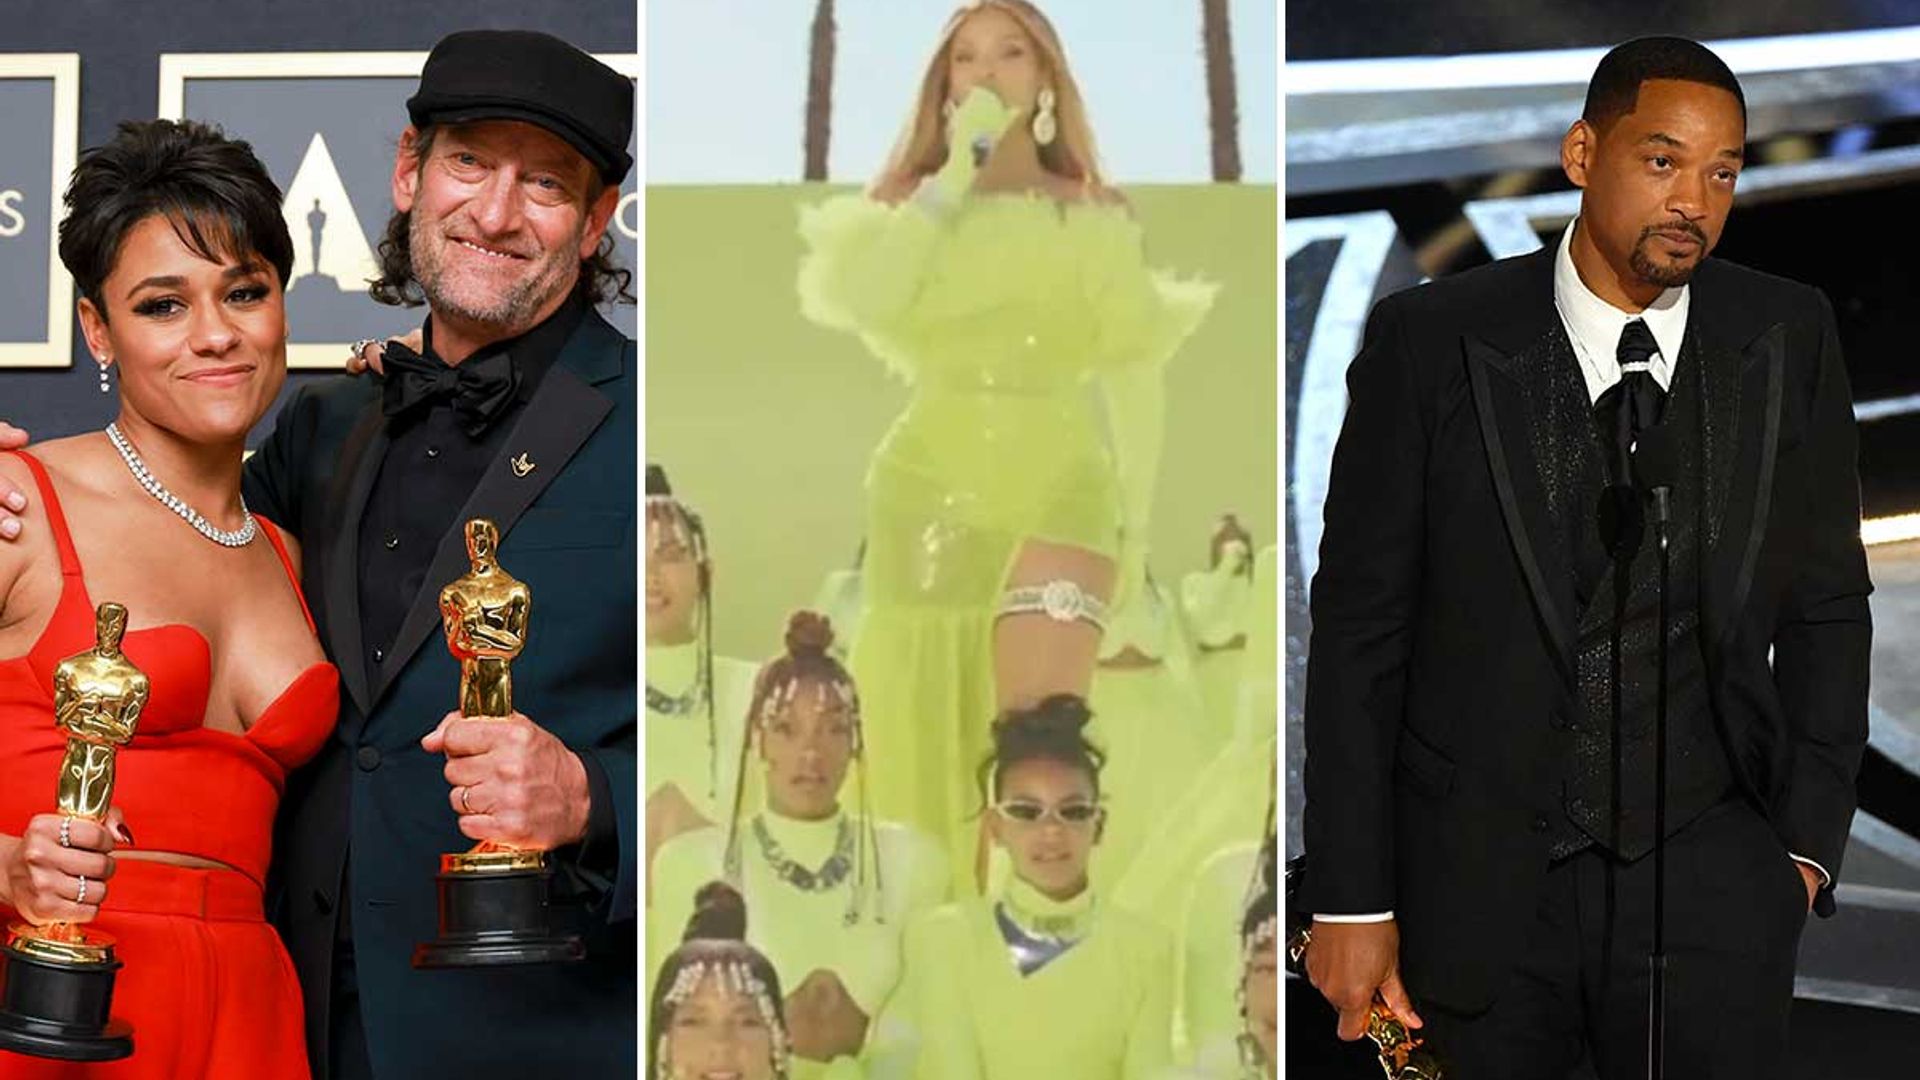 The 10 best and worst moments from the 2022 Oscars